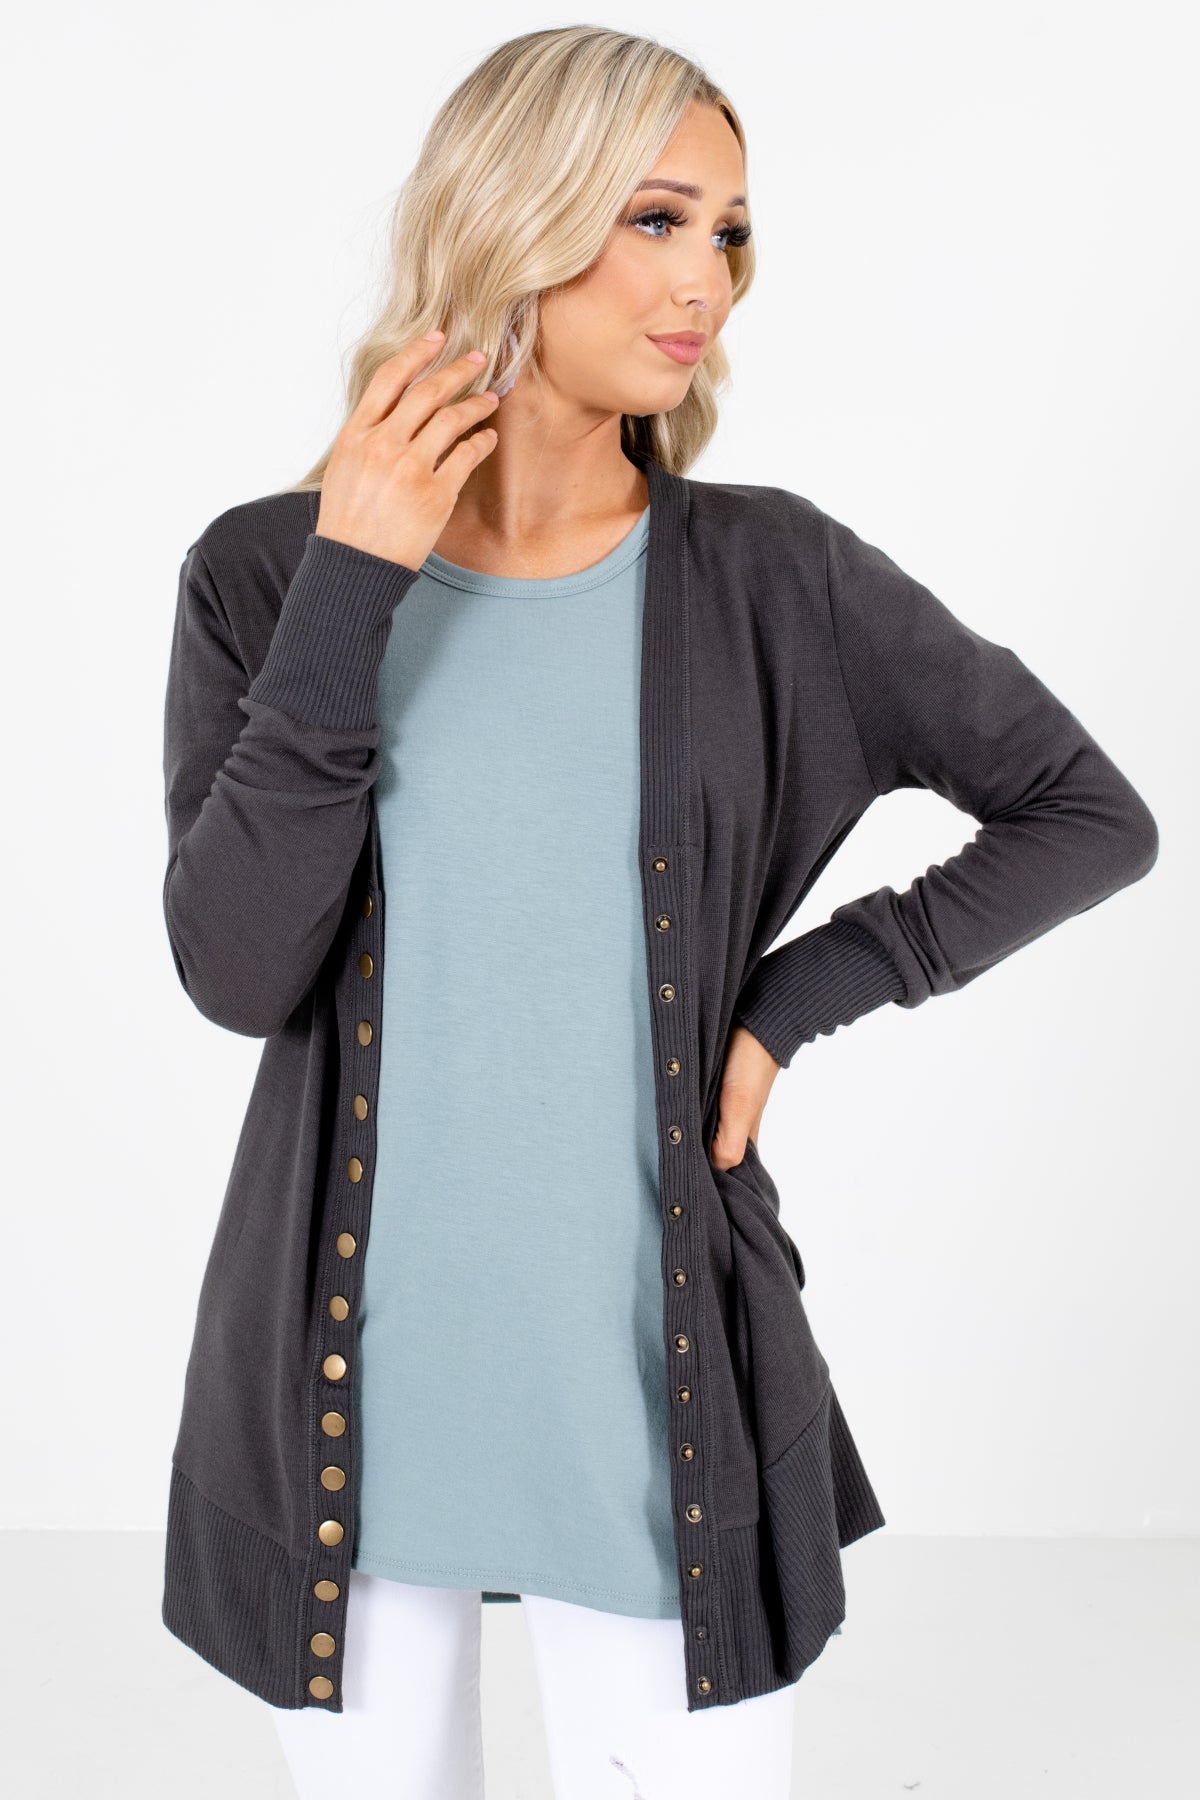 Charcoal Gray Cardigan for Women